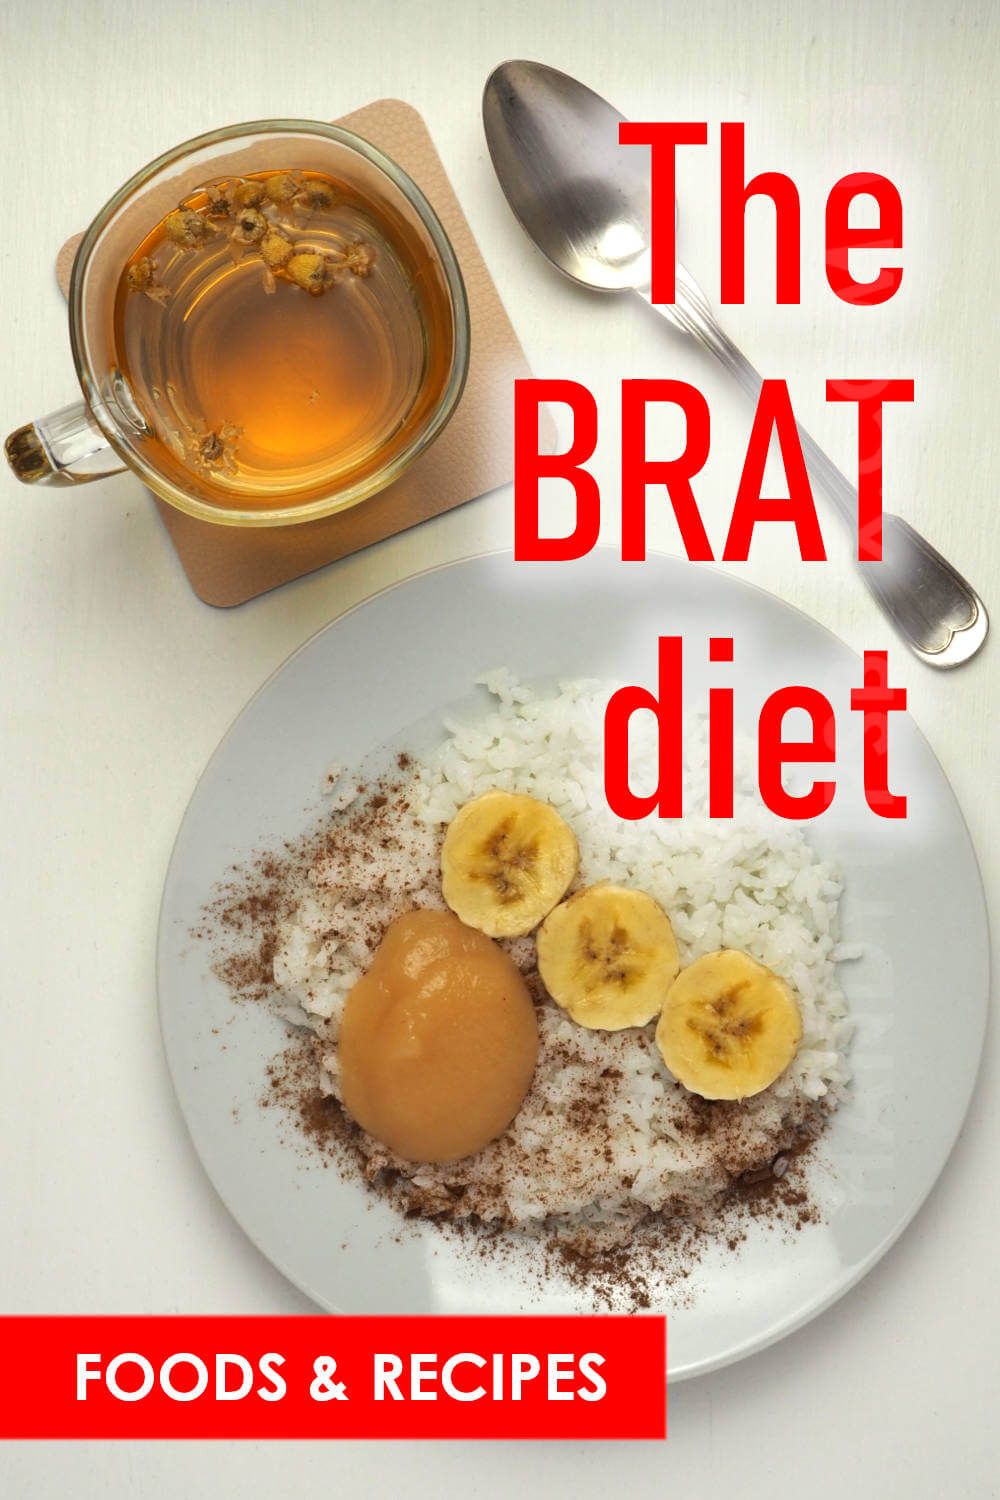 The BRAT diet: foods and recipes